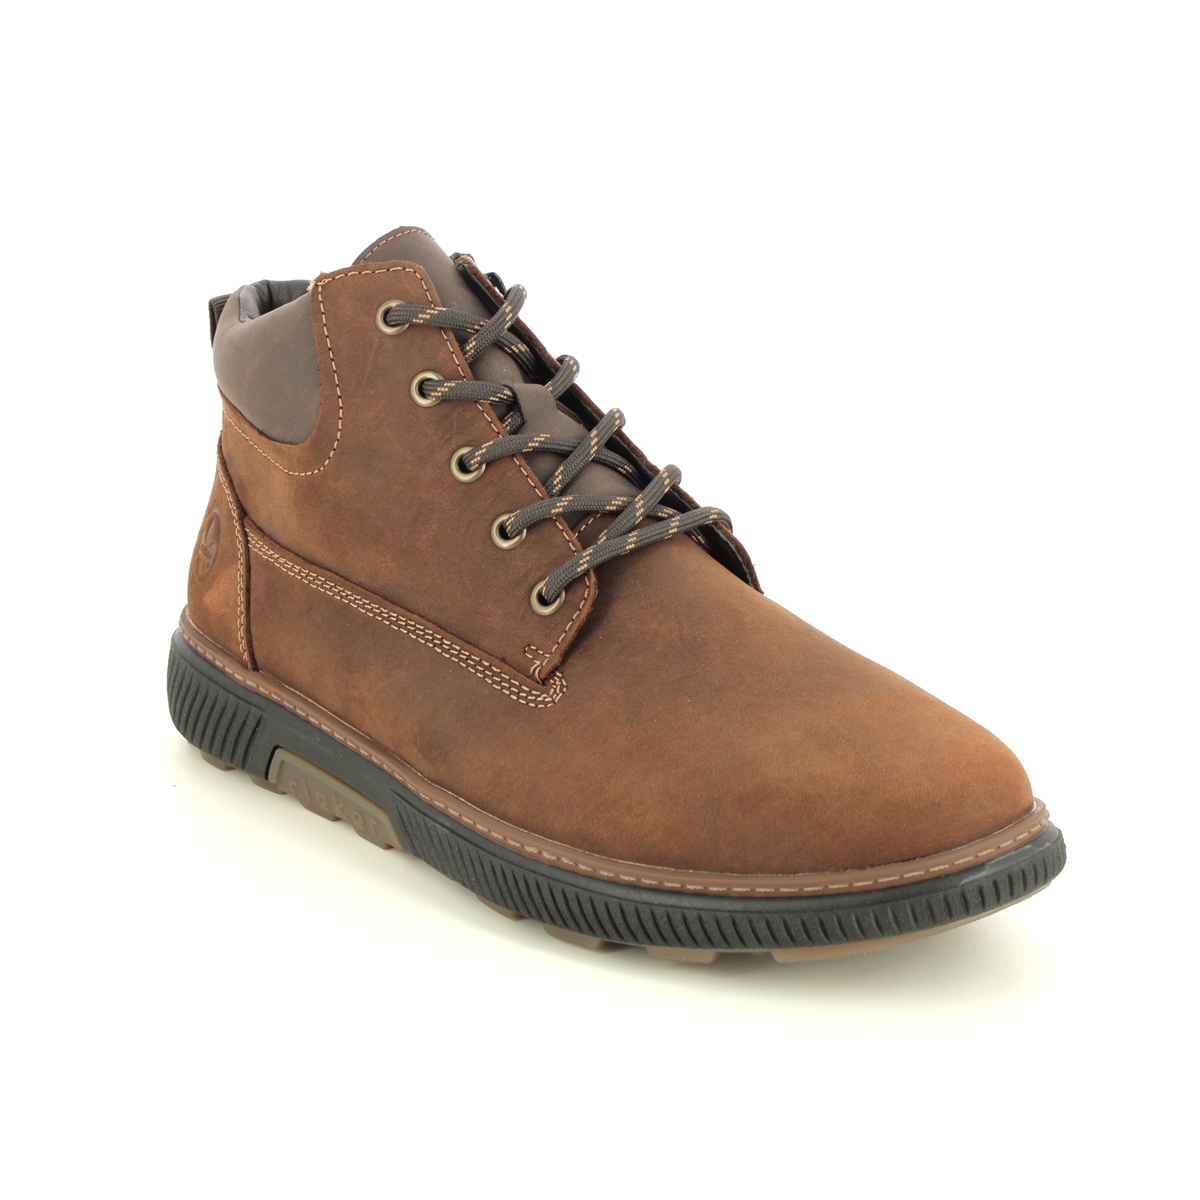 Rieker Prambola Brown Suede Mens Chukka Boots B3312-22 In Size 41 In Plain Brown Suede